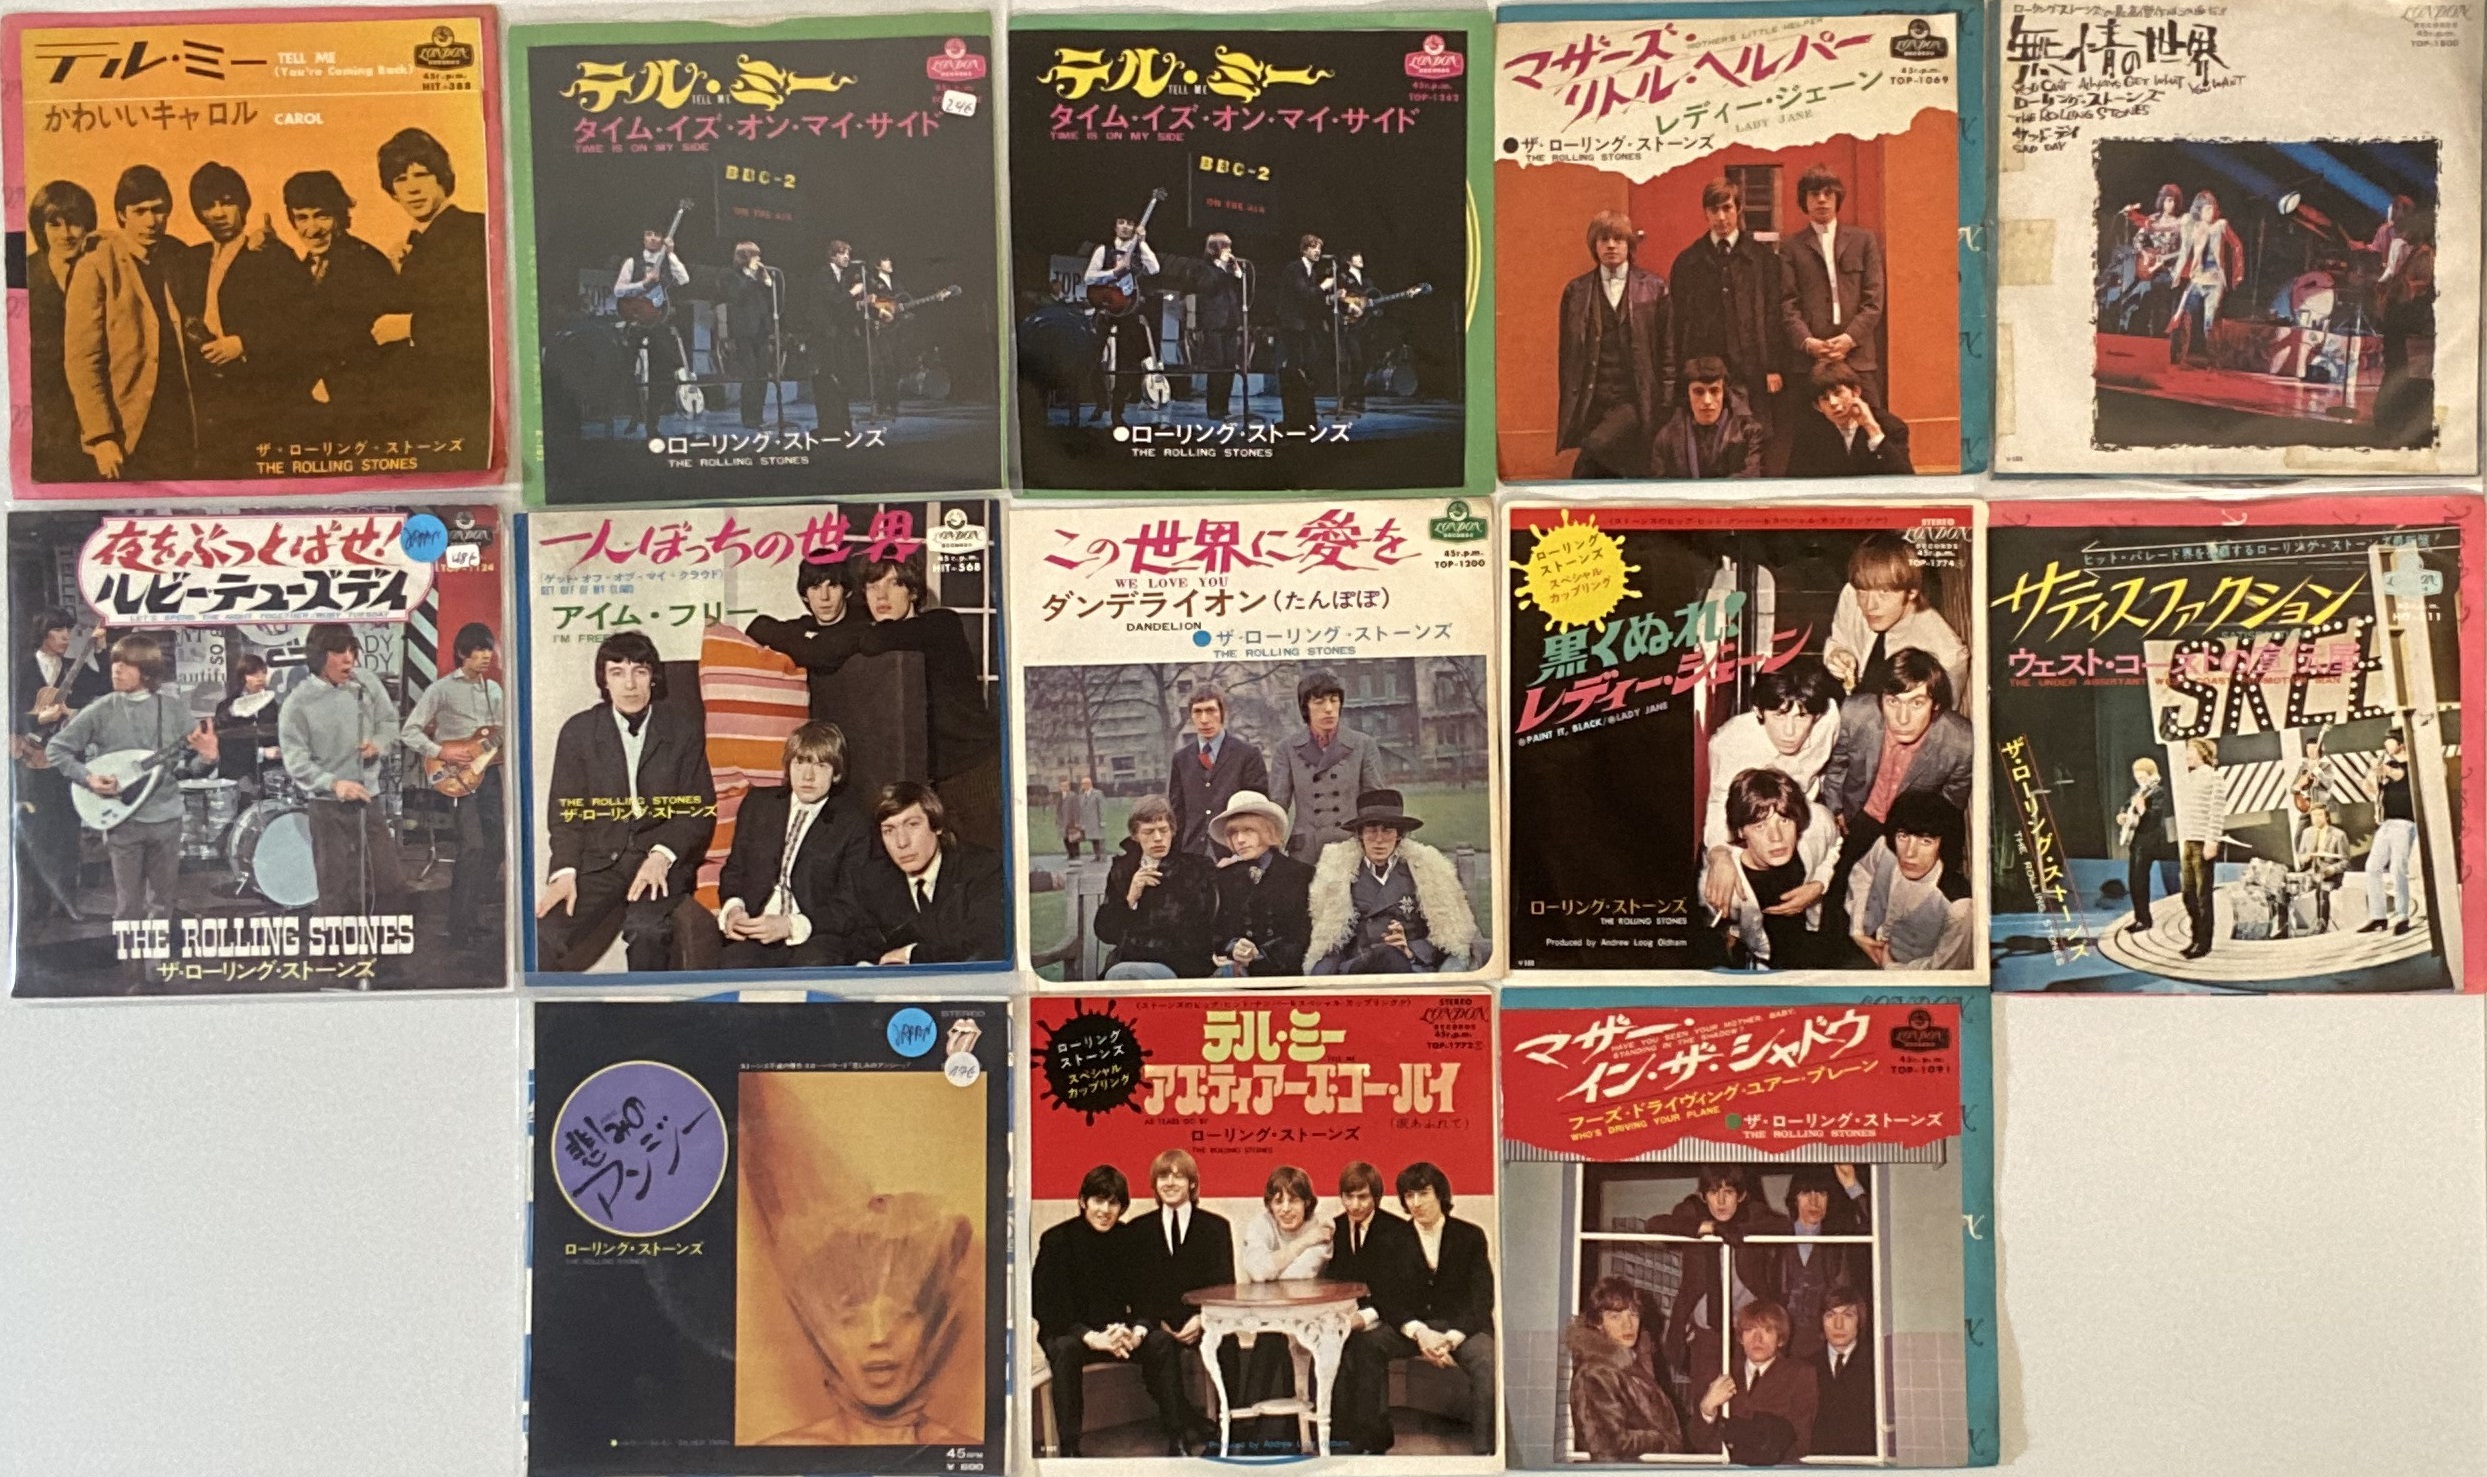 THE ROLLING STONES - JAPANESE 7" PICTURE SLEEVE RELEASES.